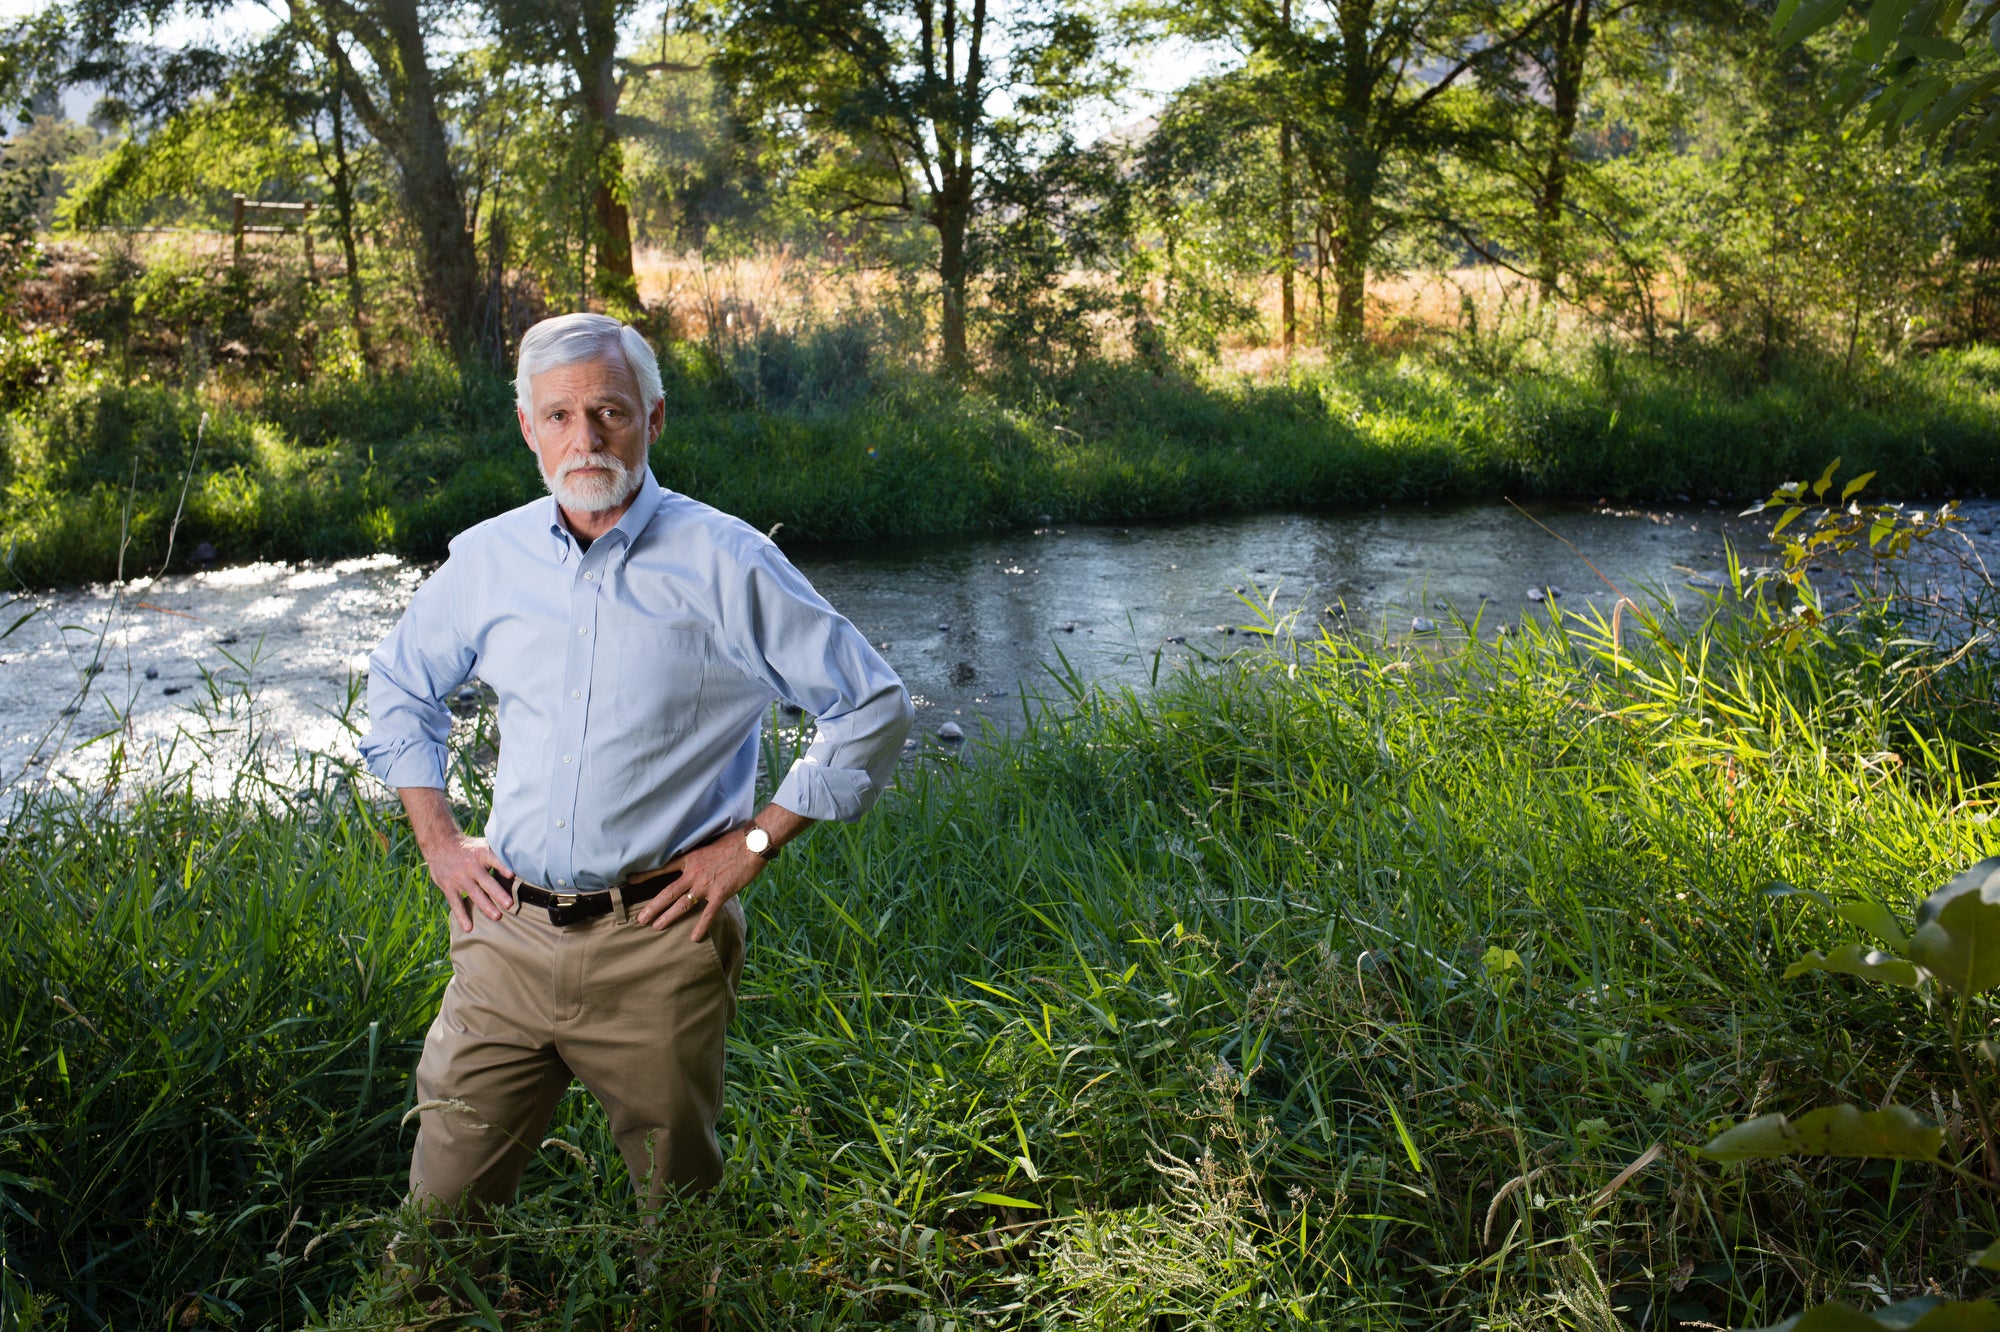 Portrait of a man looking directly at the camera, standing next to a river.